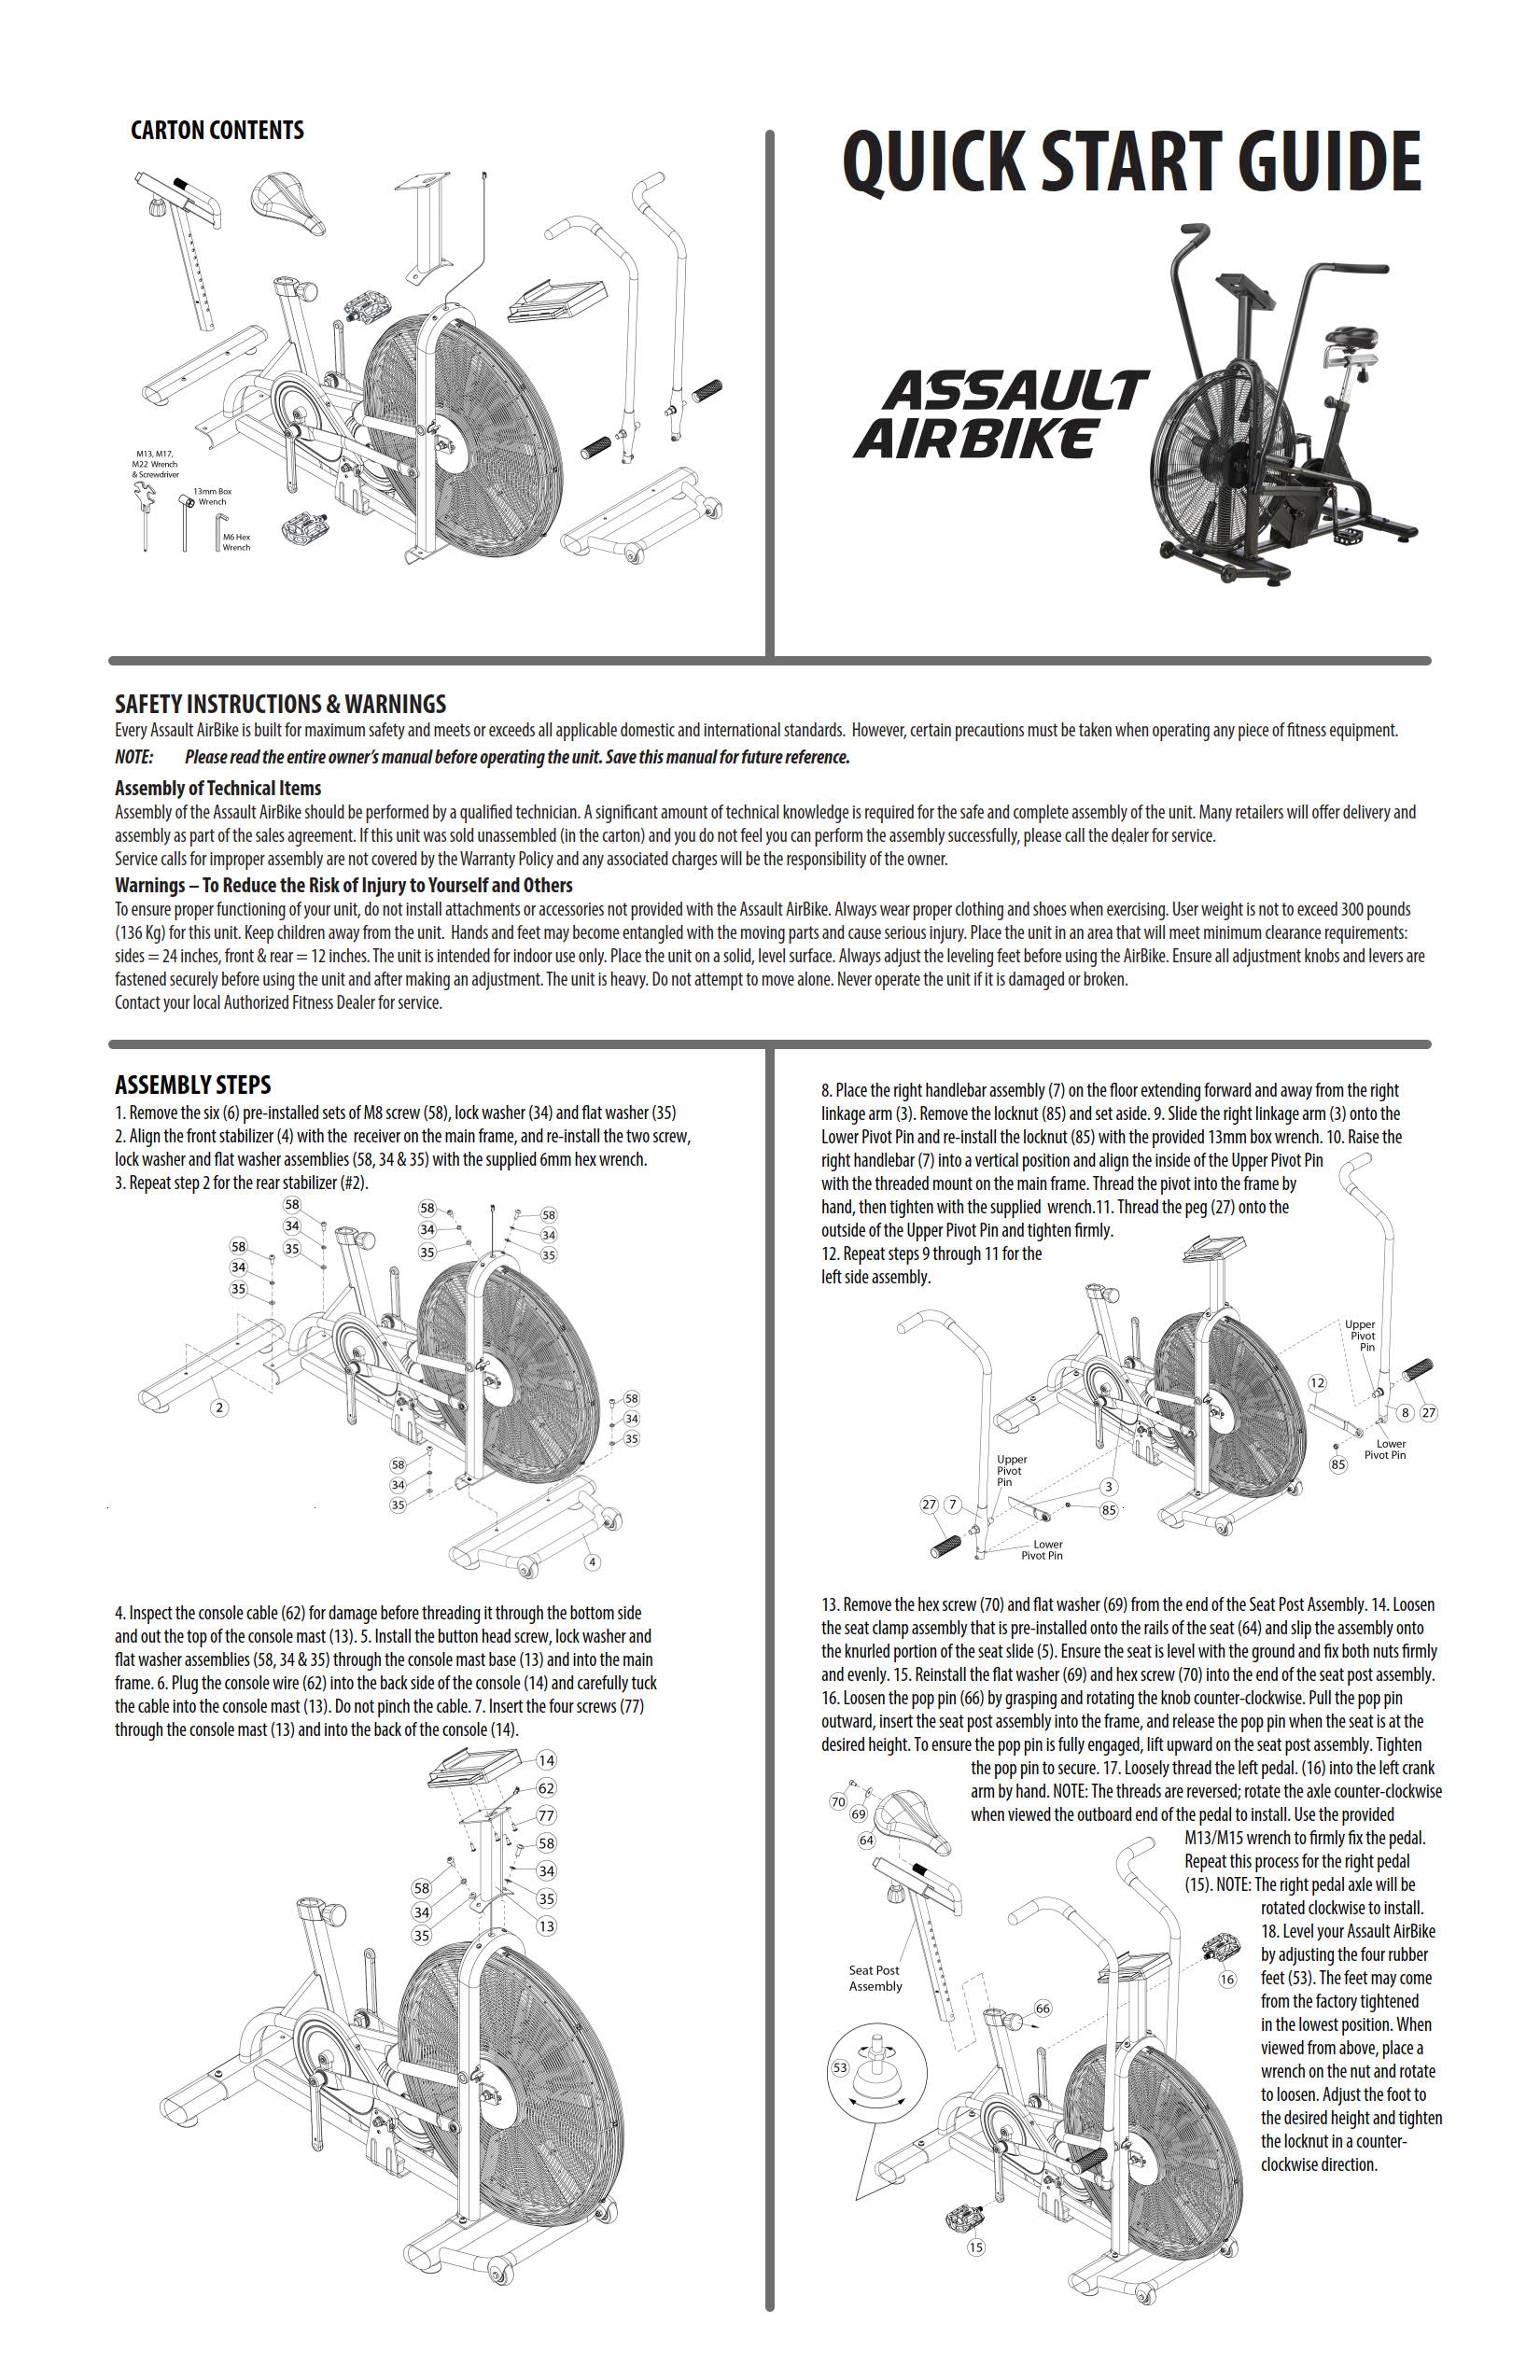 Assault_AirBike_Classic_Owners_Manual__23-AS-100_19July17_2.jpg